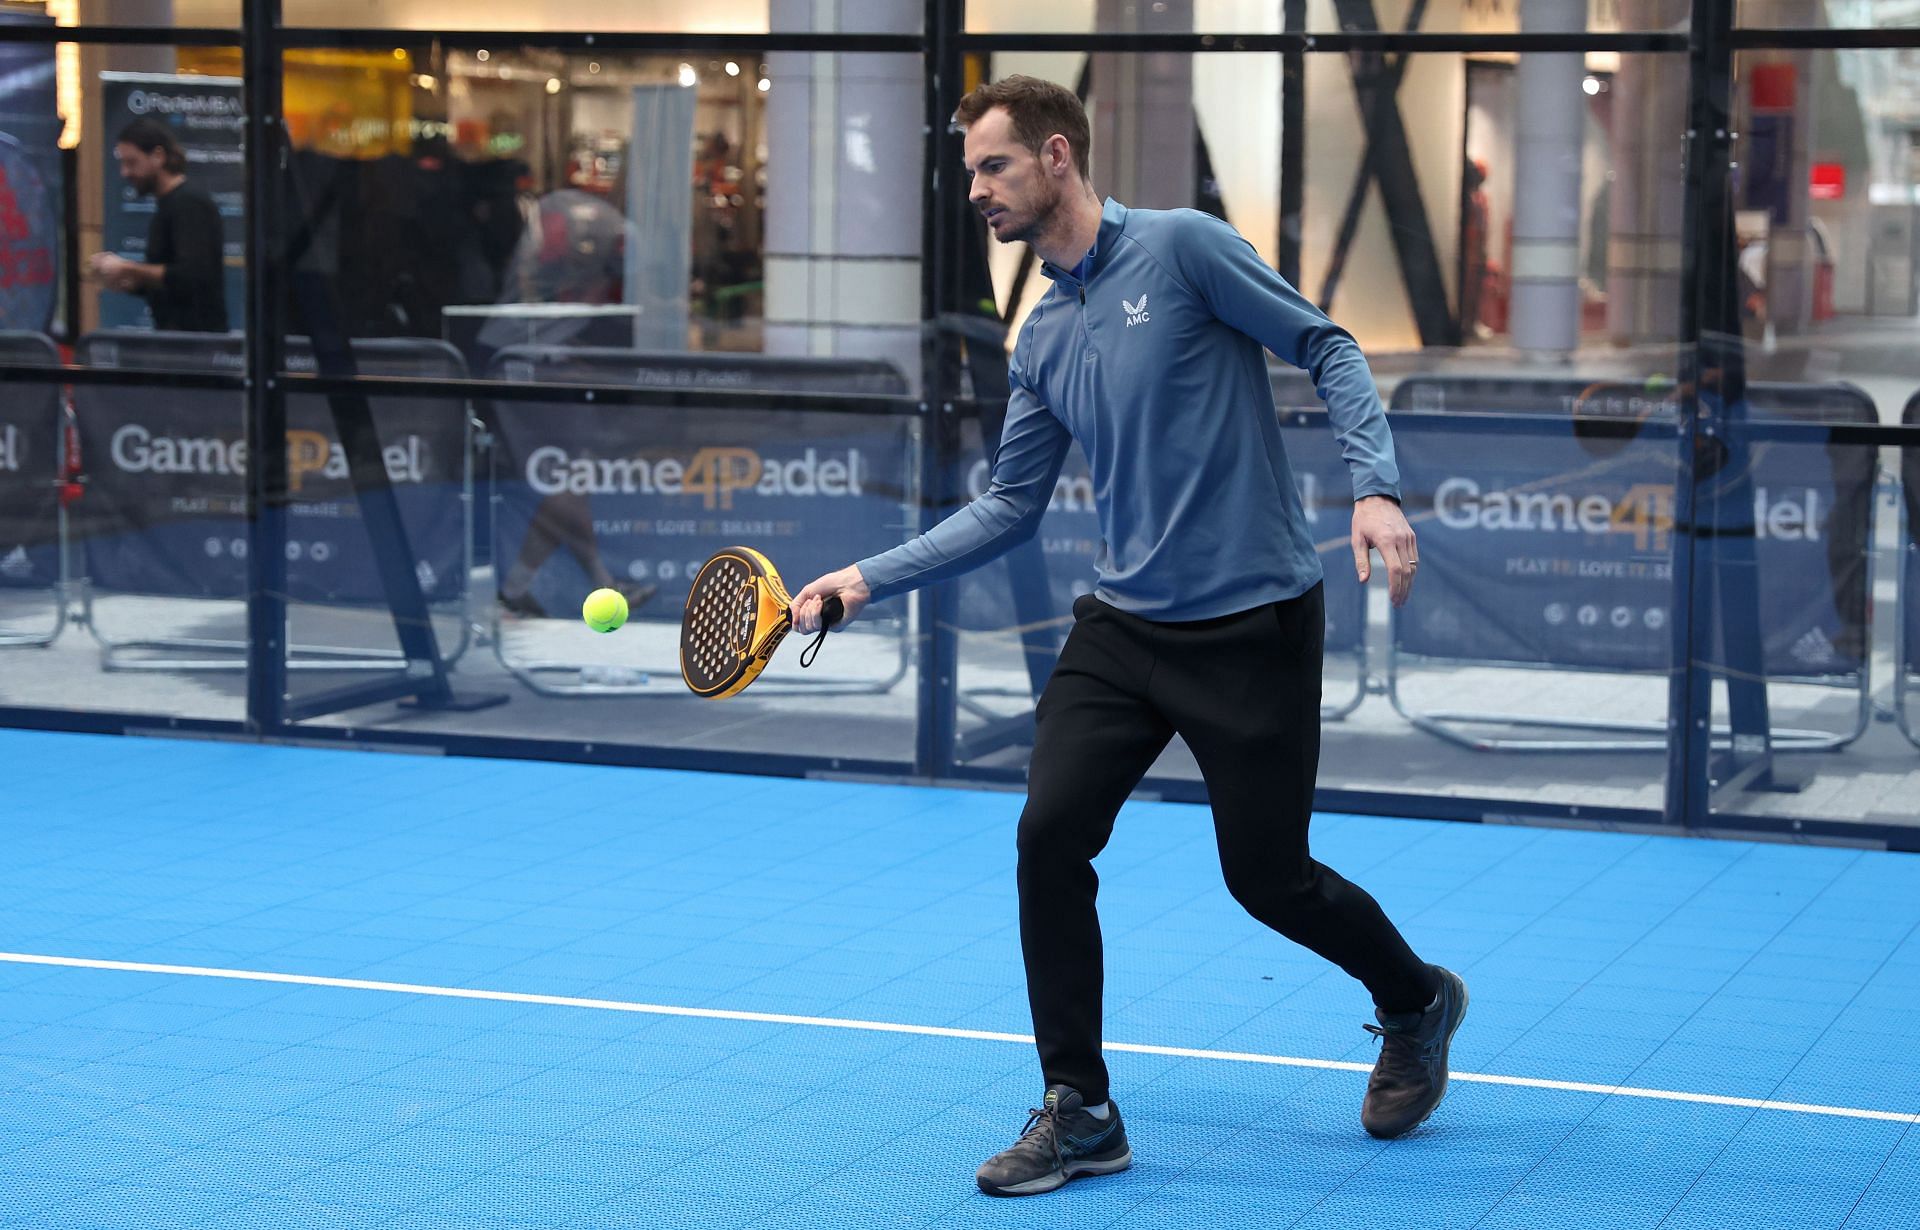 Andy Murray playing padel at an event in London